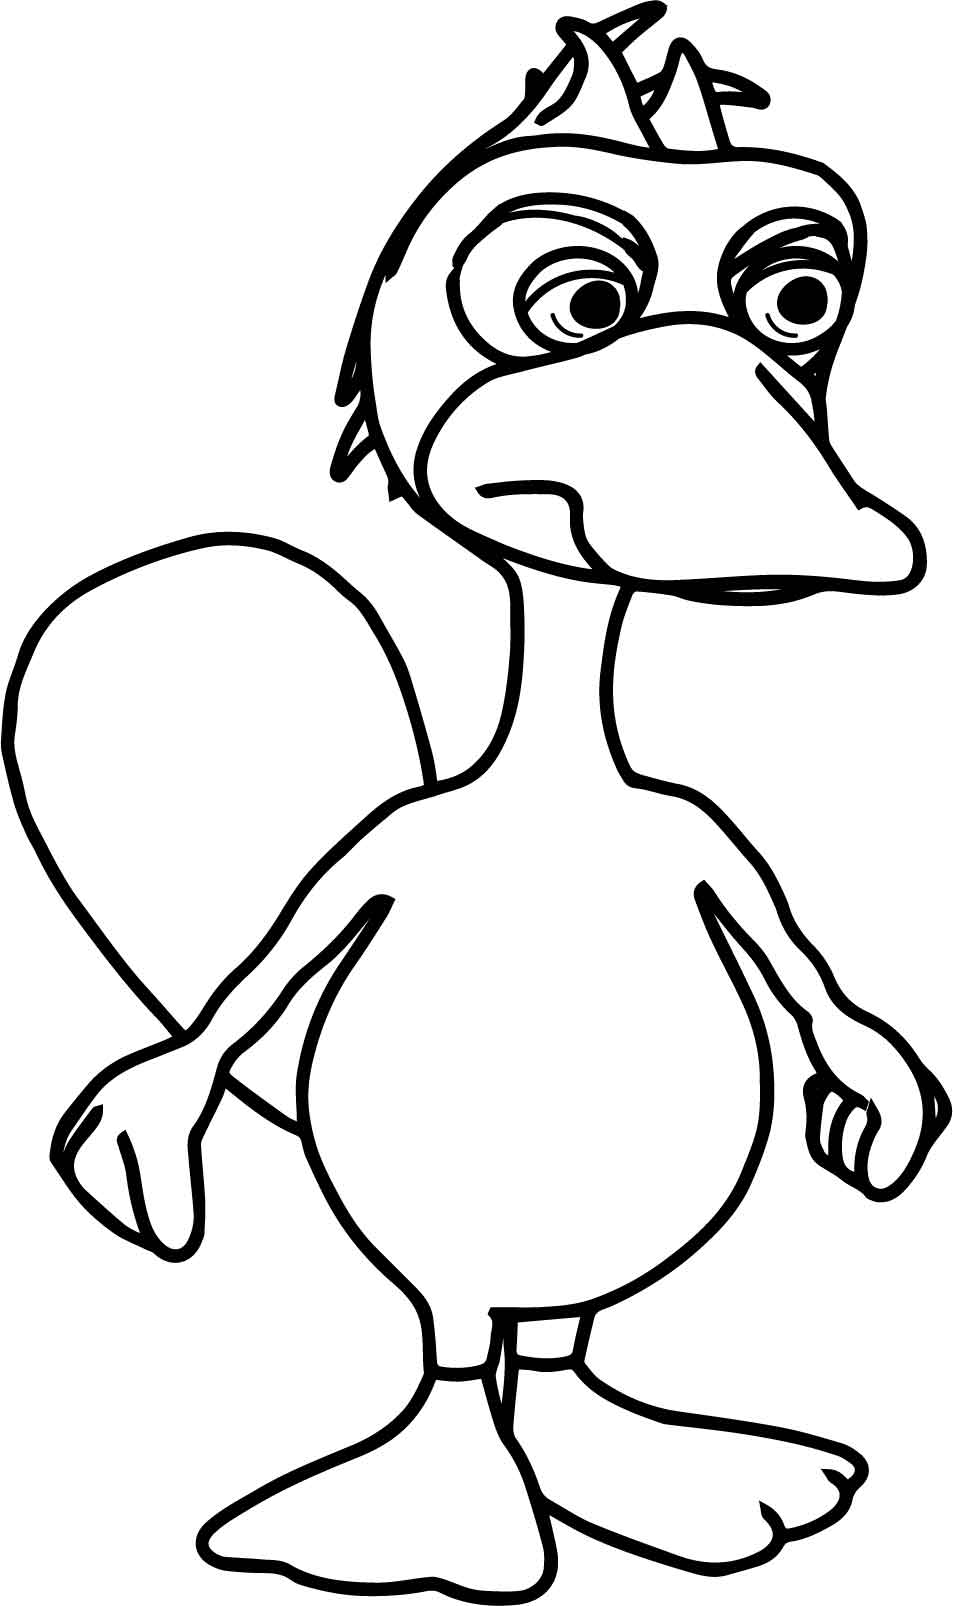 Quack Duck Angry Cartoon Coloring Page - Wecoloringpage.com